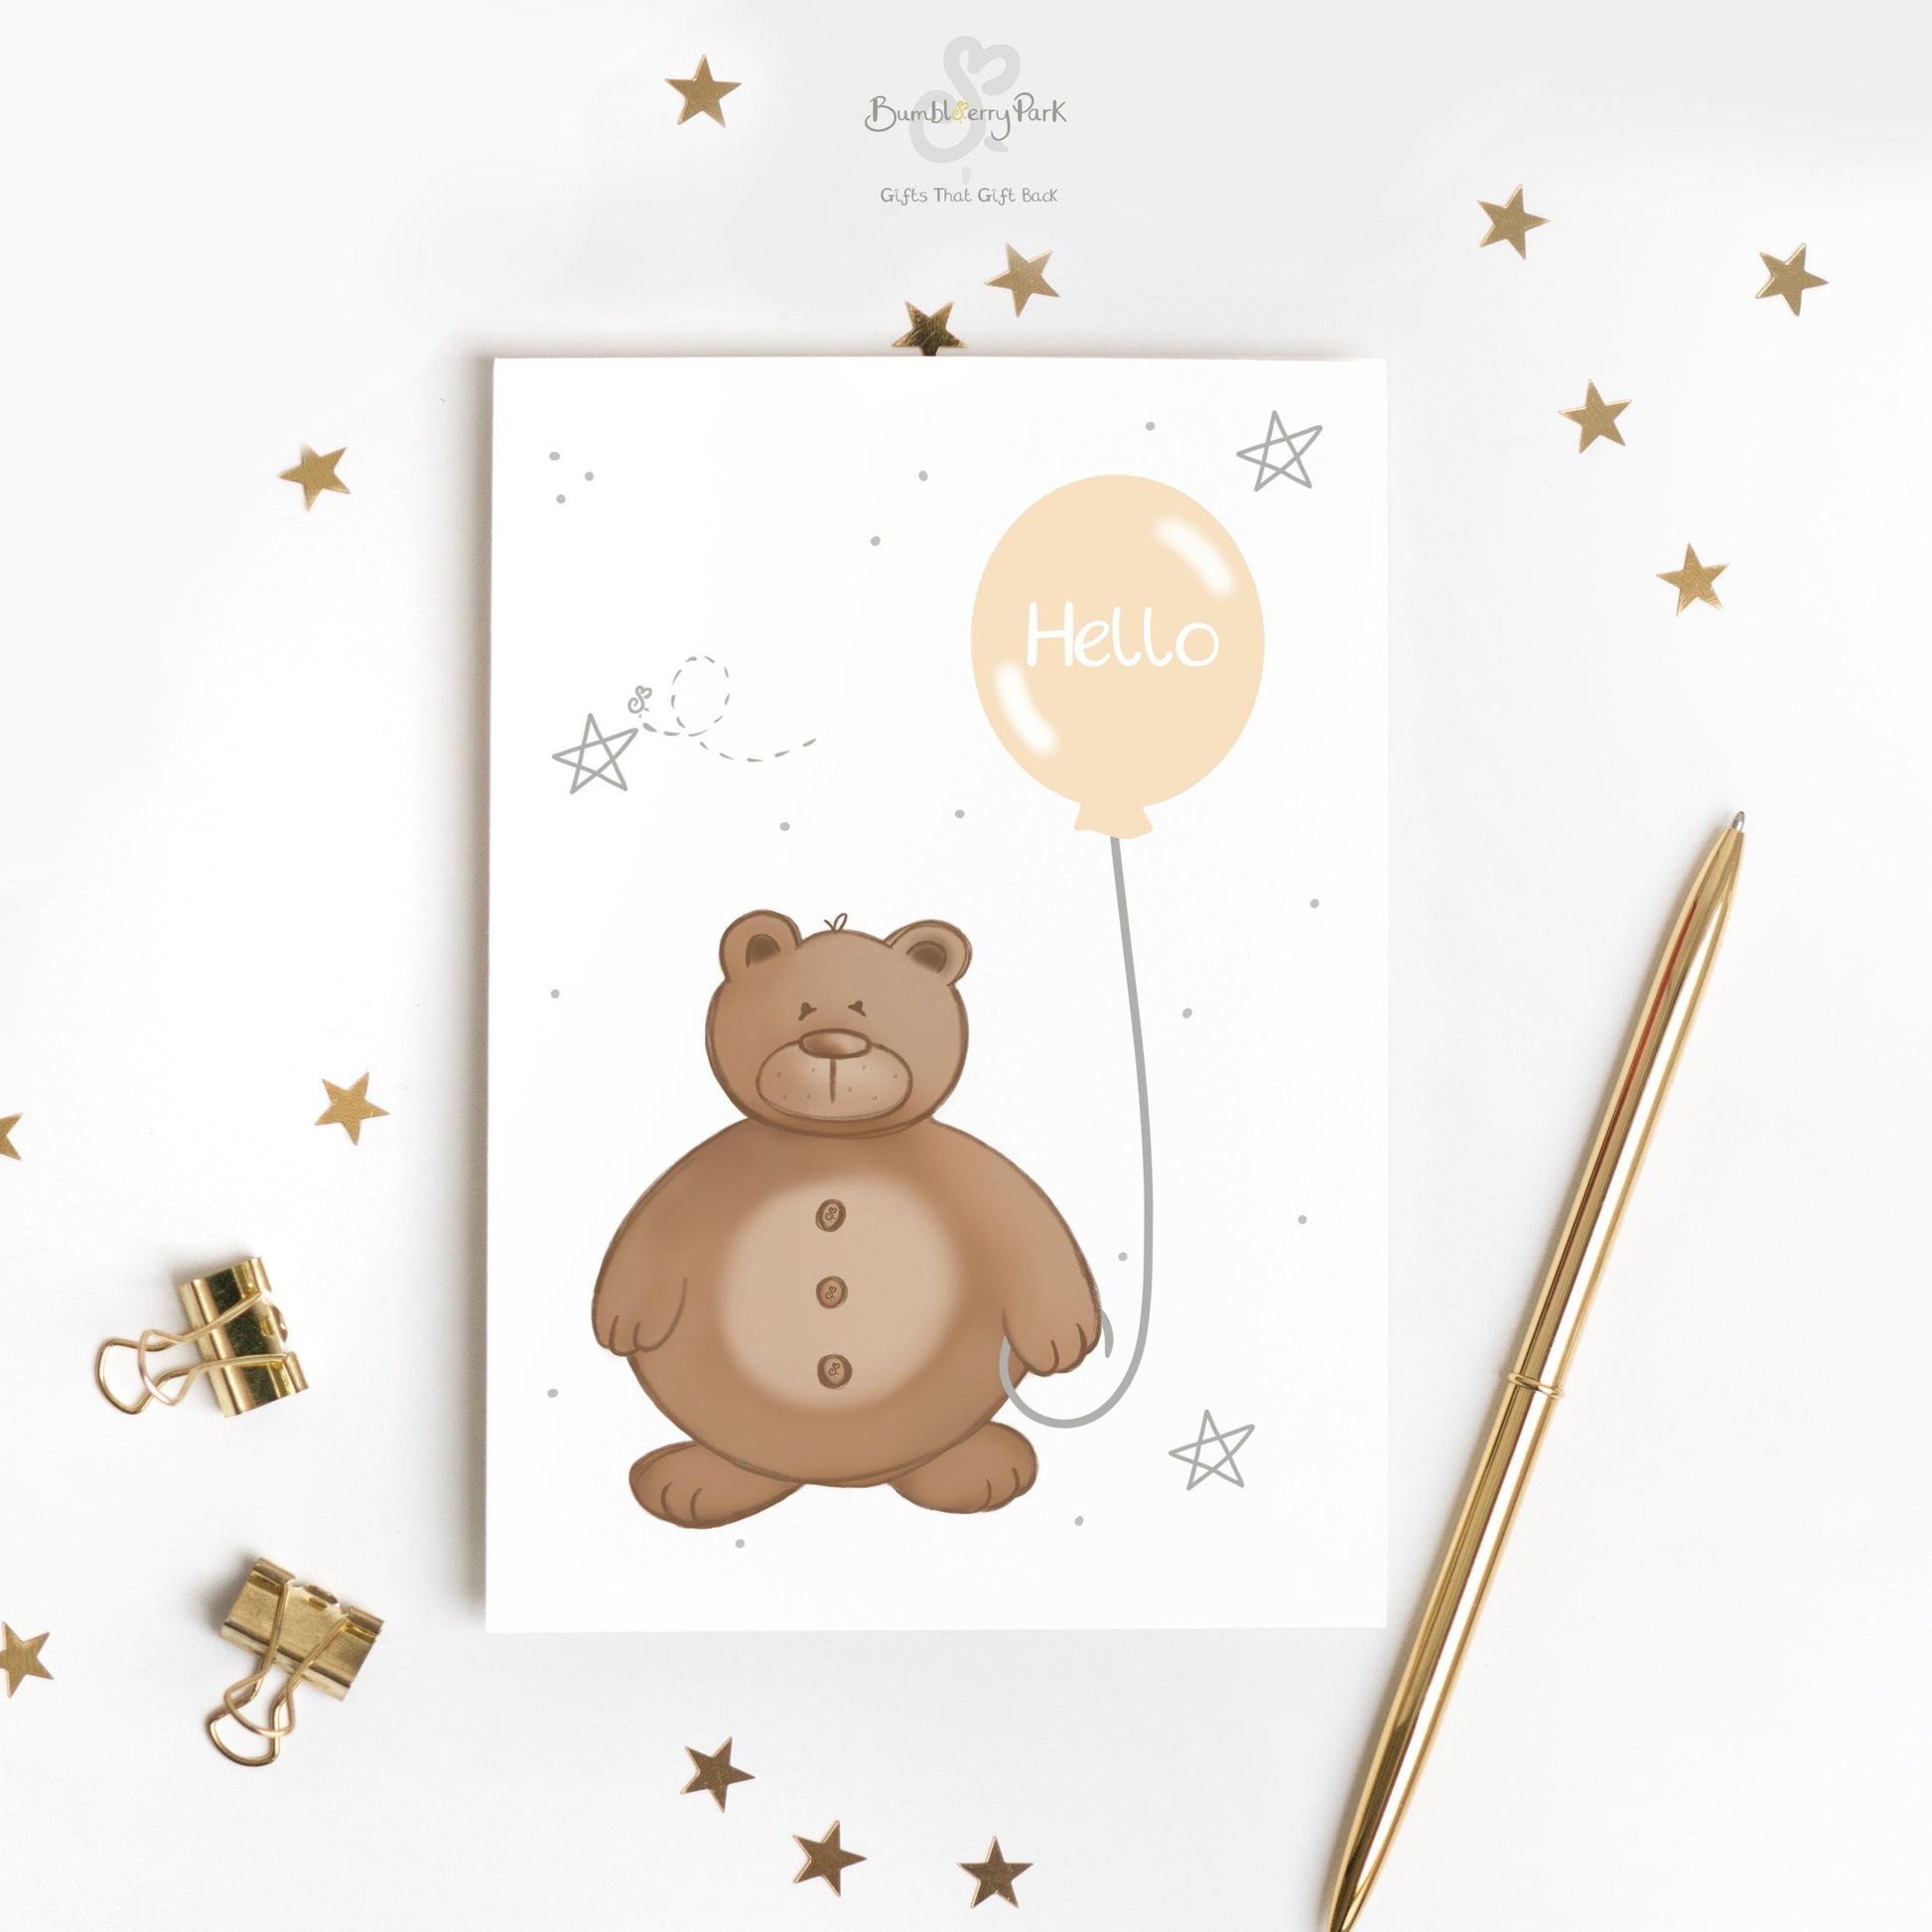 new baby unisex card with teddy bear holding a balloon with "hello" gift message